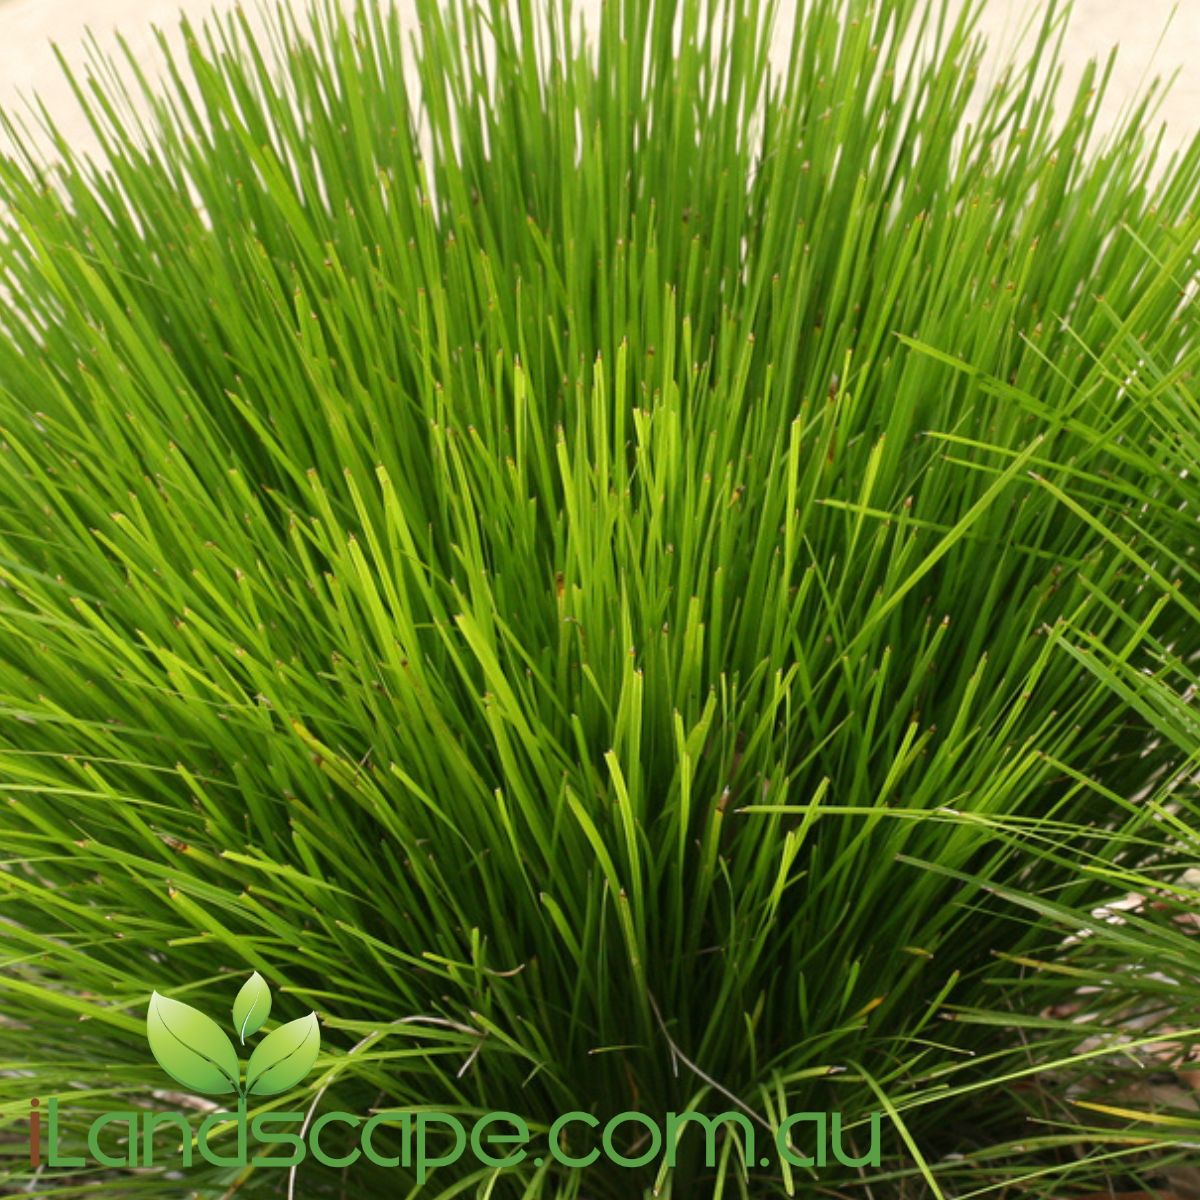 Lomandra Lime tuff  produces lush lime green, strappy foliage in a compact form.   Grows well in frost areas, Full Sun positions and in shaded areas which may be dry, for example under trees competing for nutrient and water. overall a very hardy, tough grassy plant that is perfect for borders, bio retention basins and areas where you want something to survive with out having to looking after it to much  grows approx - 50cm high x 50 cm wide   lomandra longifolia x confertifolia subsp.pallida